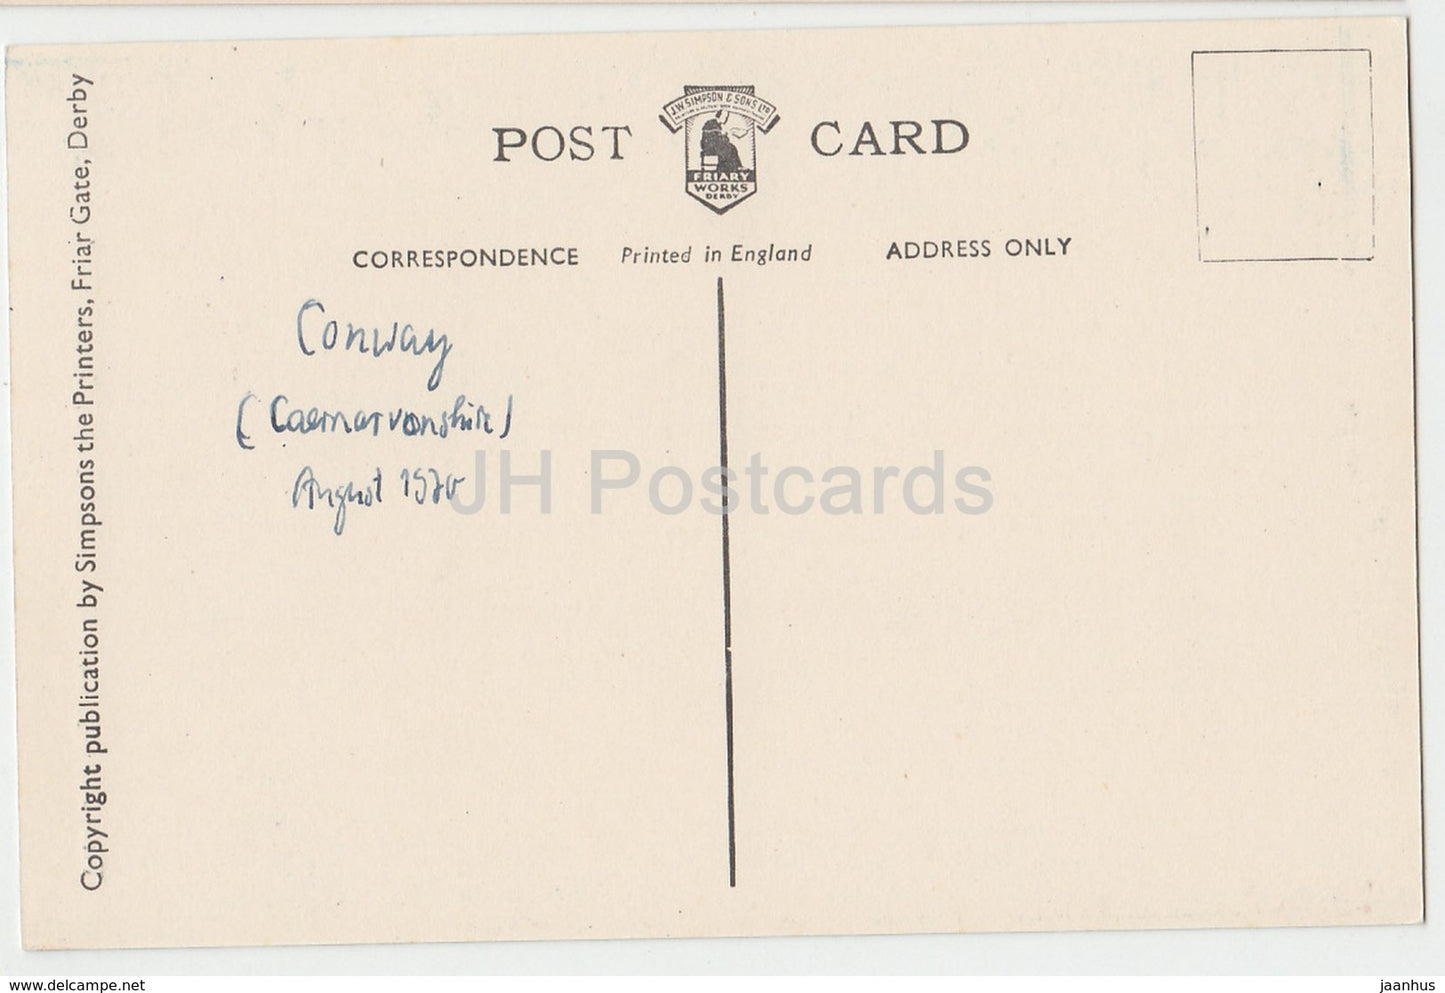 Conway - The Calvary - St. Michael' s Church - 1970 - United Kingdom - Wales - used